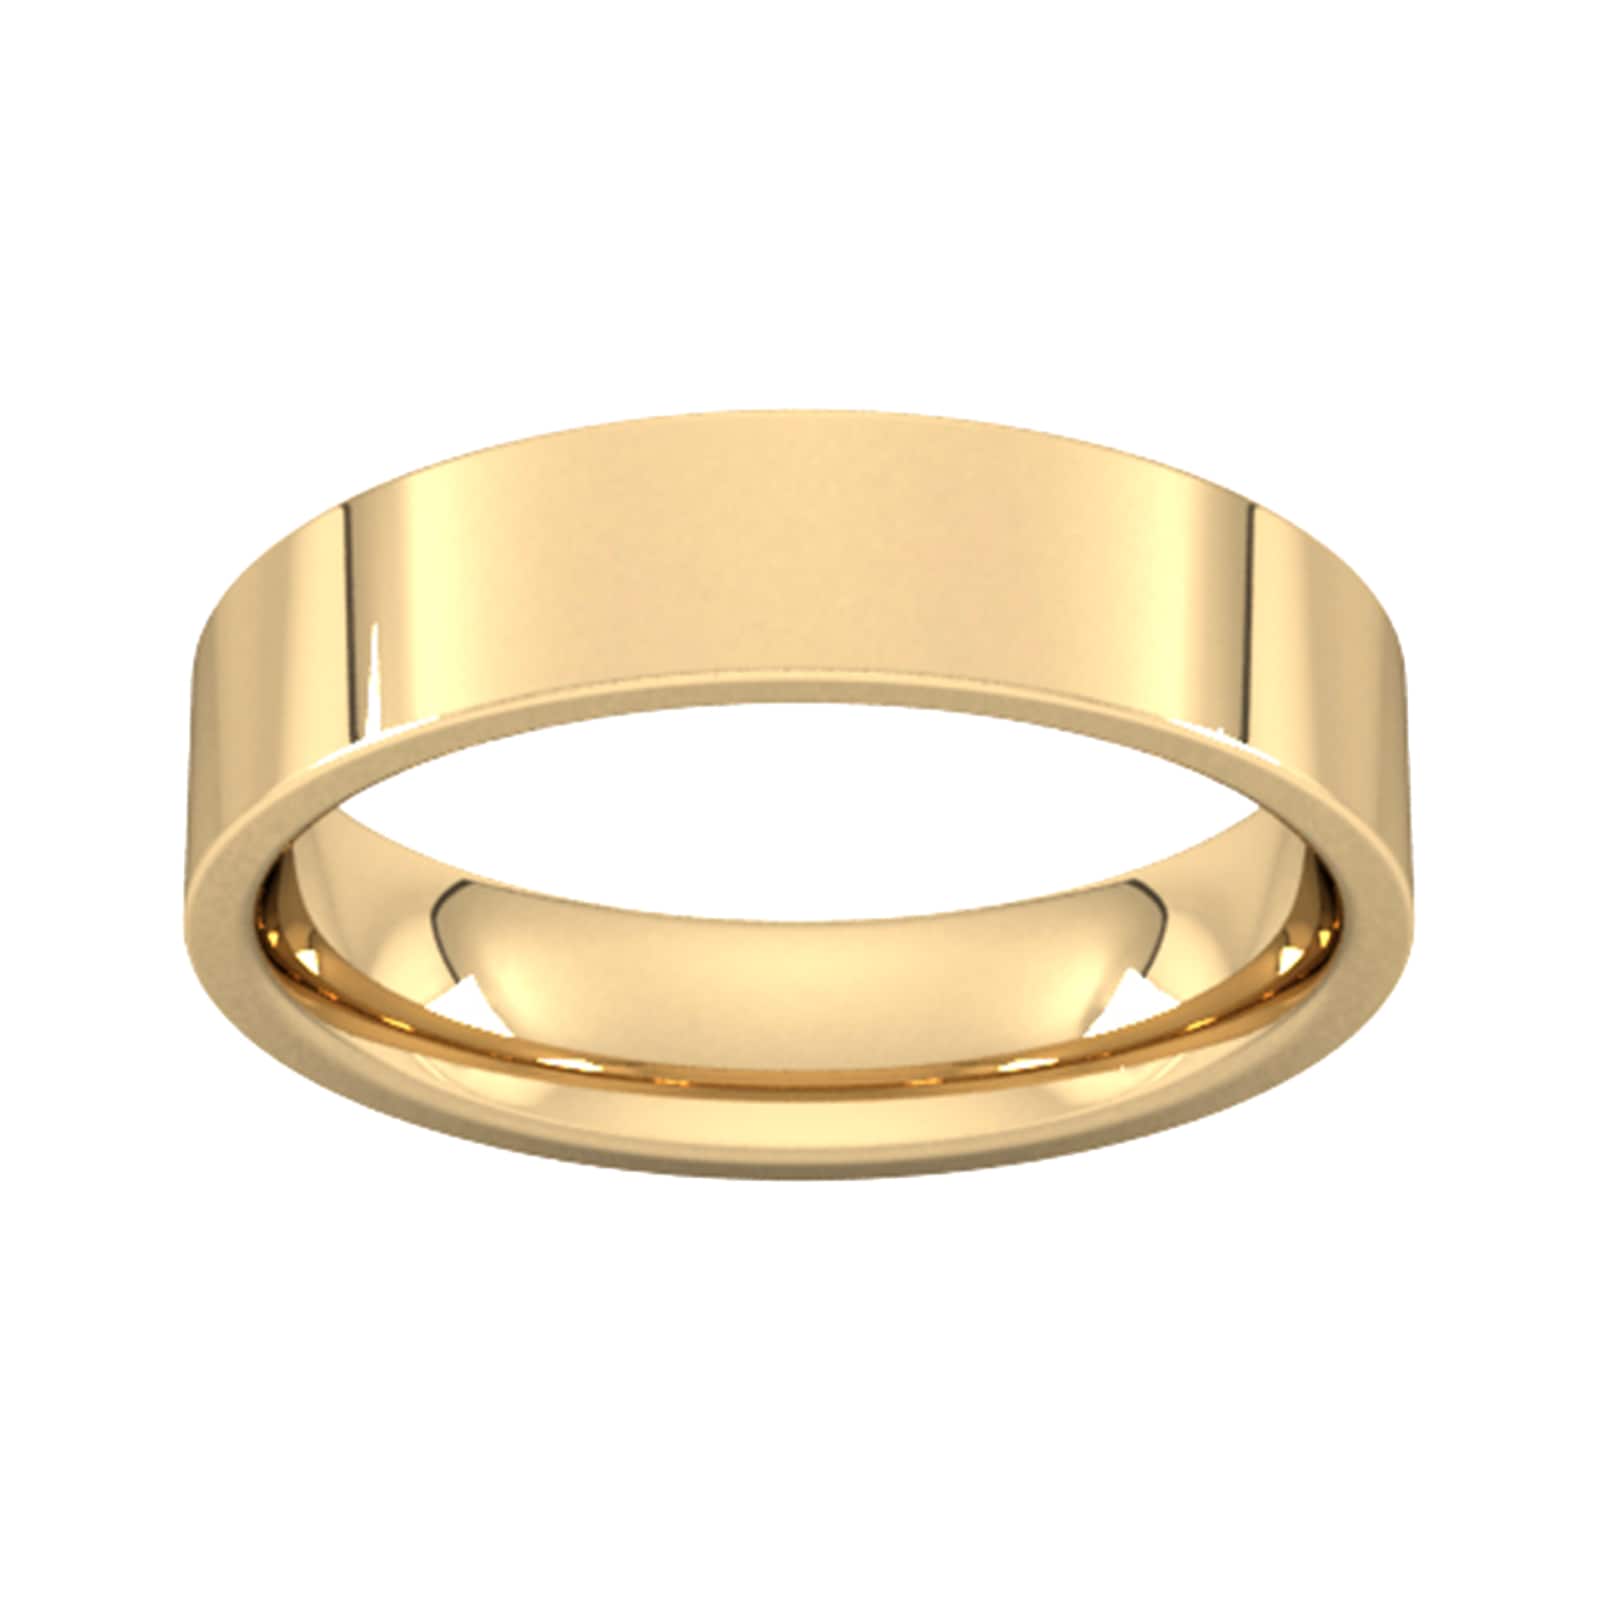 5mm Flat Court Heavy Wedding Ring In 9 Carat Yellow Gold - Ring Size L